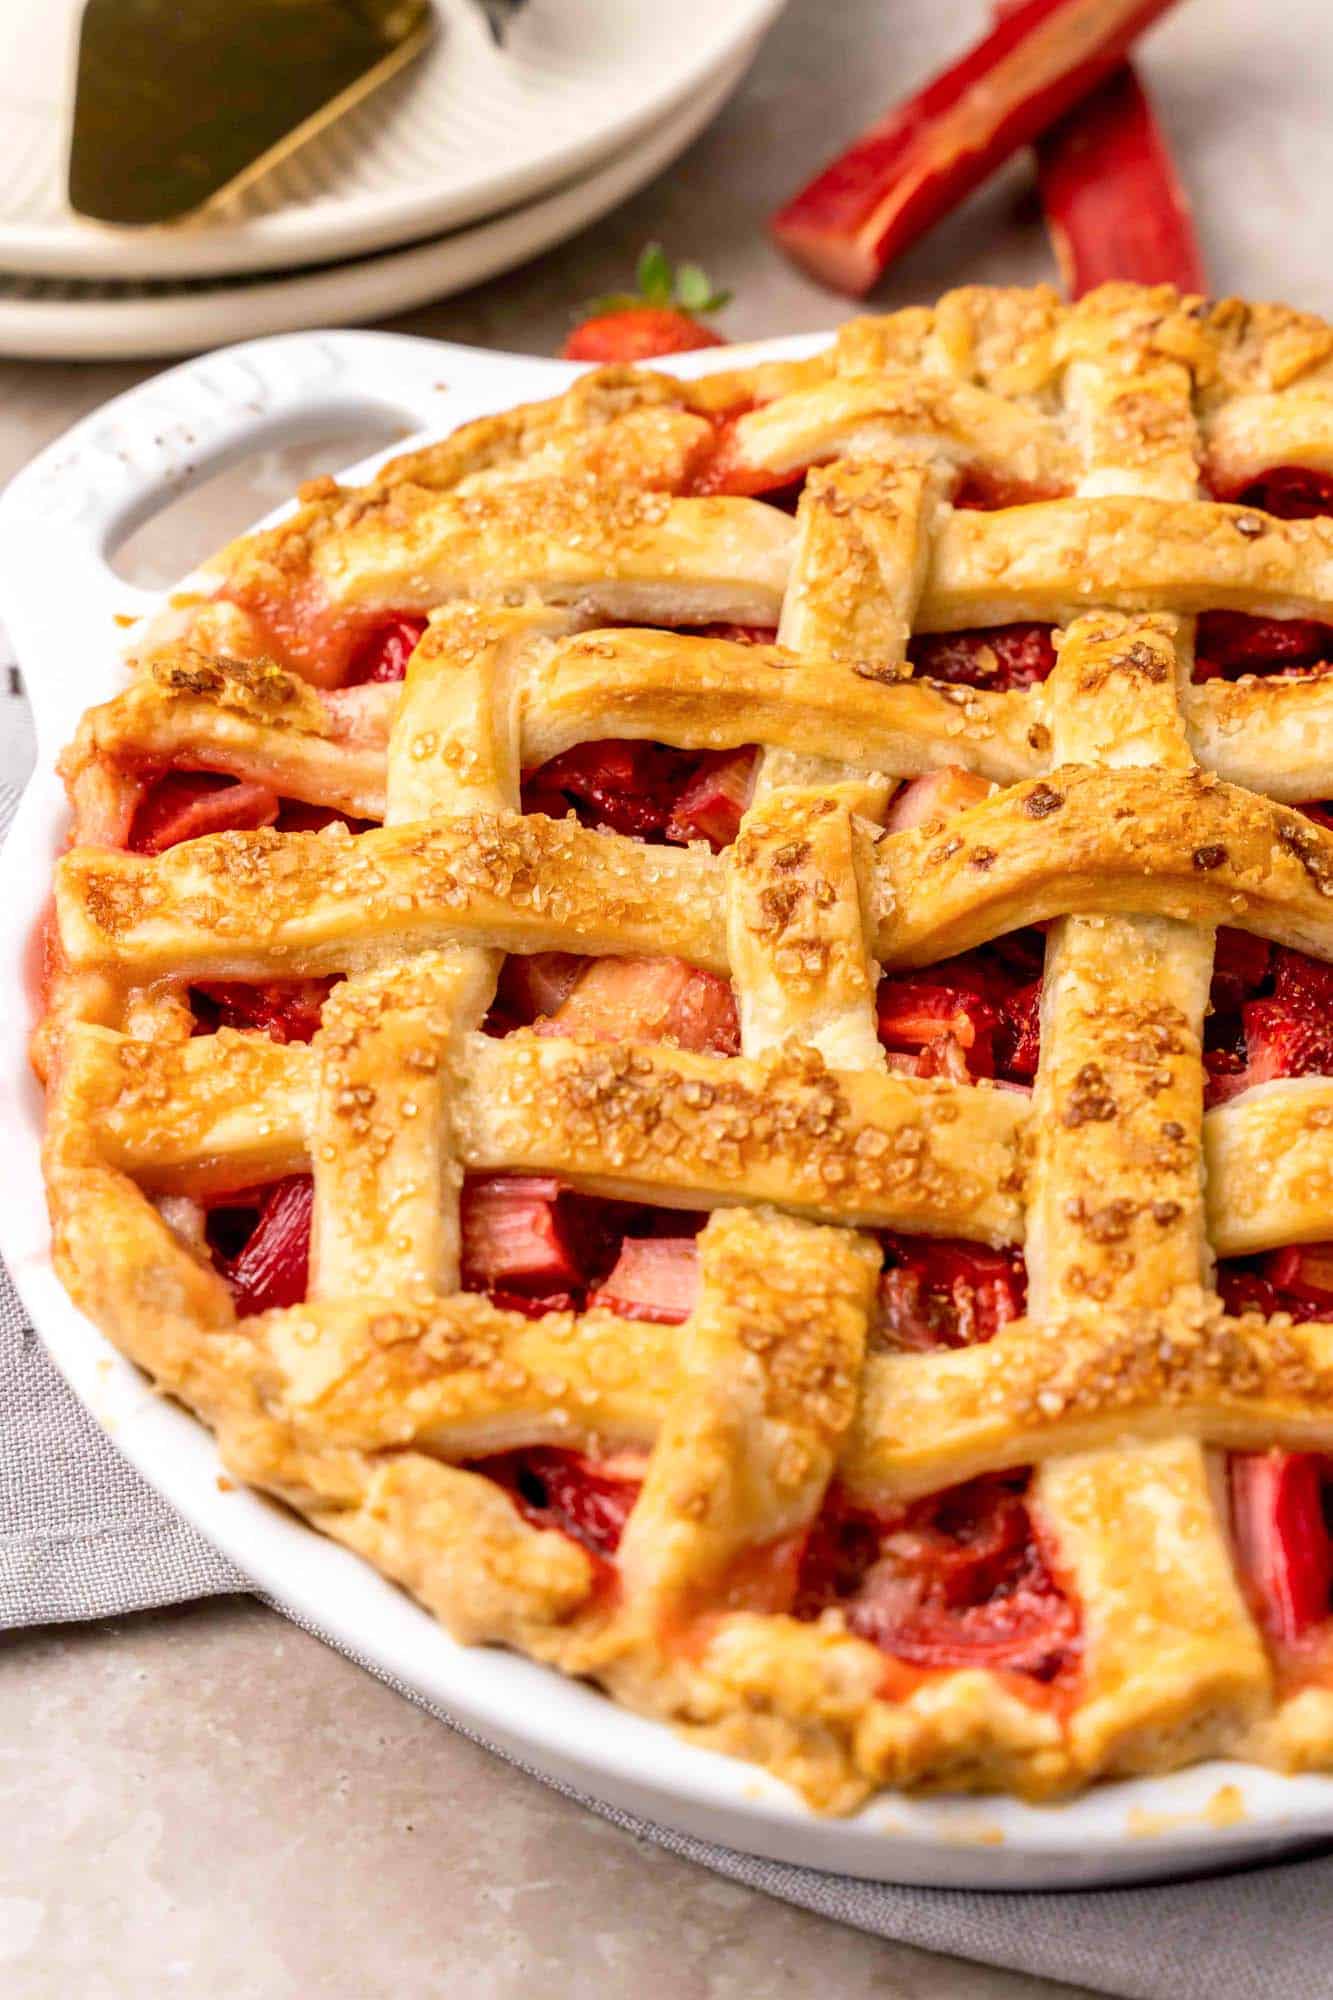 A side photo of the pie made of Strawberry and Rhubarb
